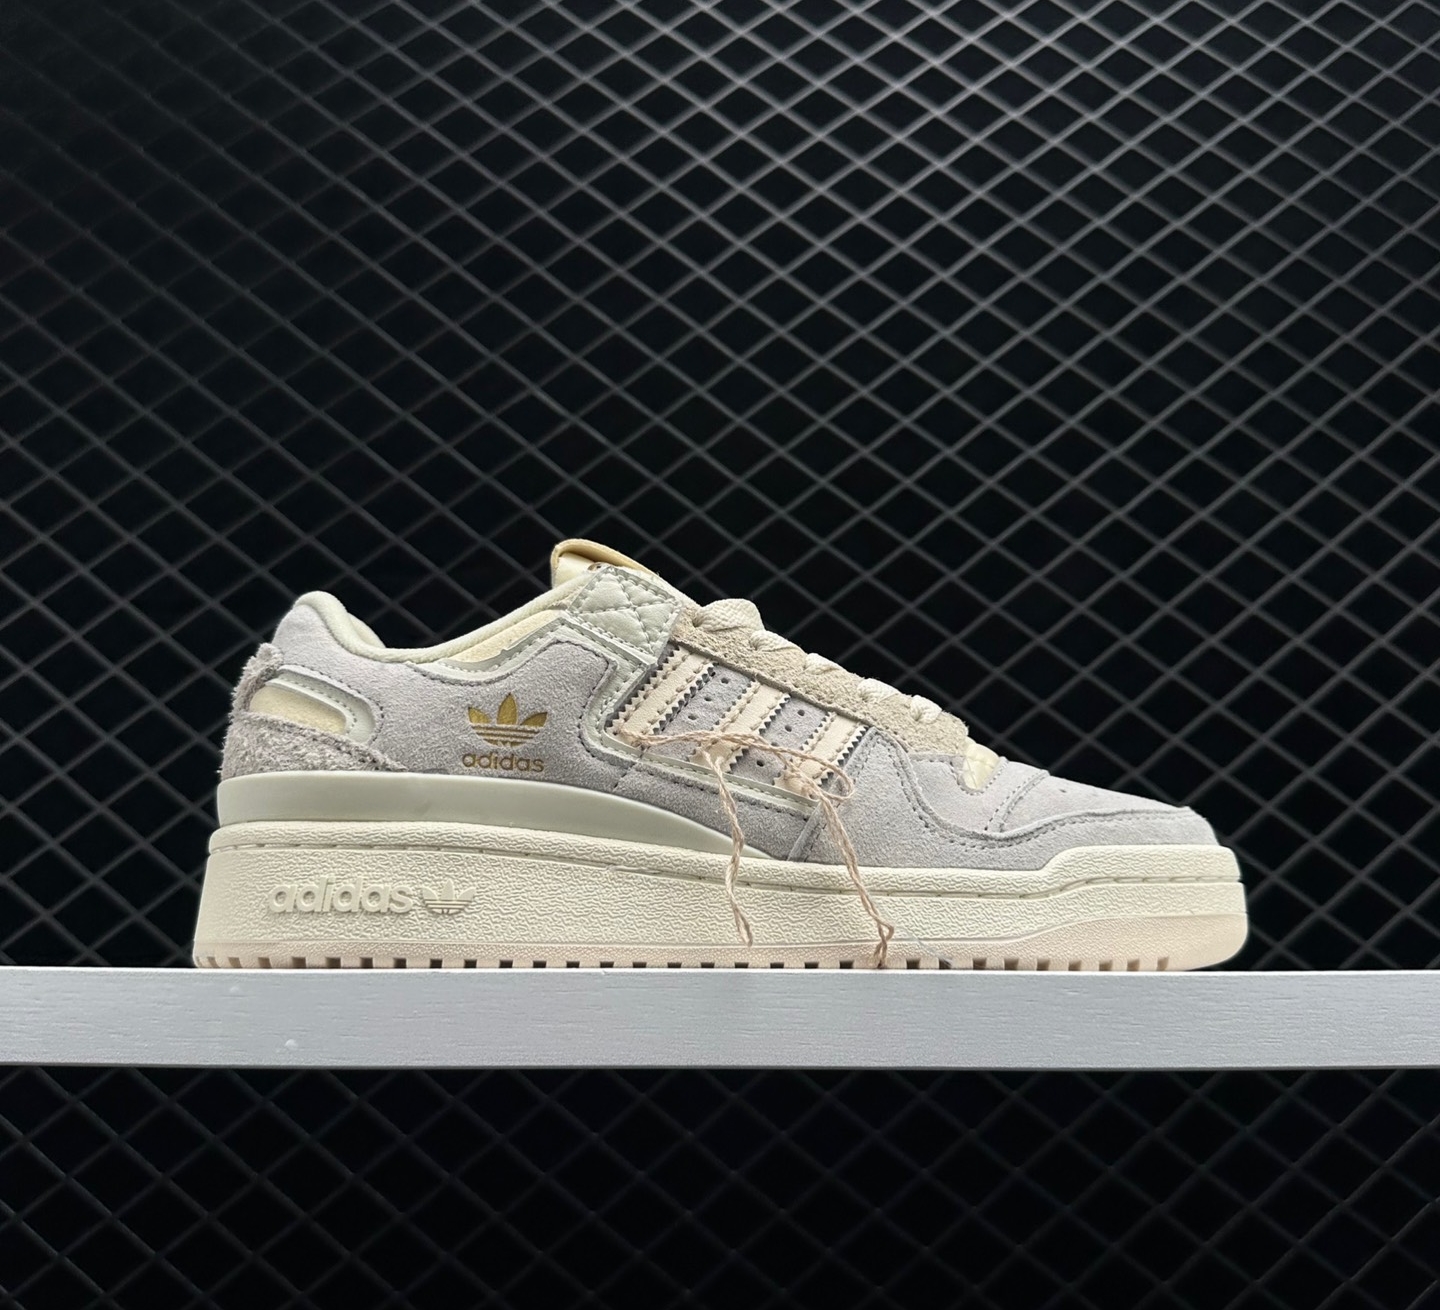 Adidas Forum 84 Low 'Off White' GW0299: Classic Style meets Contemporary Fashion